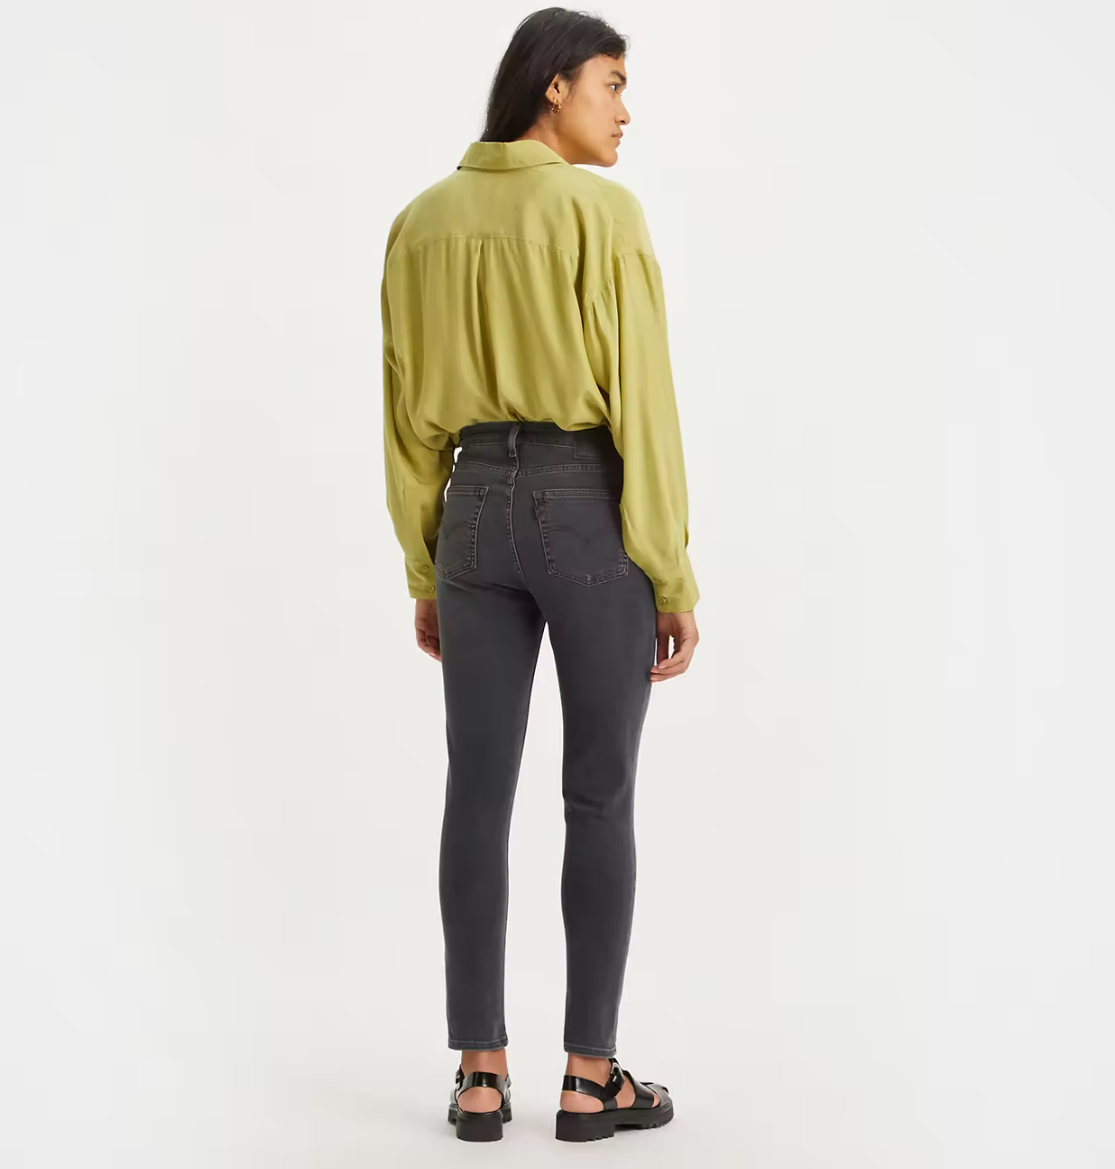 Levi's 721 High Rise Skinny Jeans - Black Worn In - Hores Stores